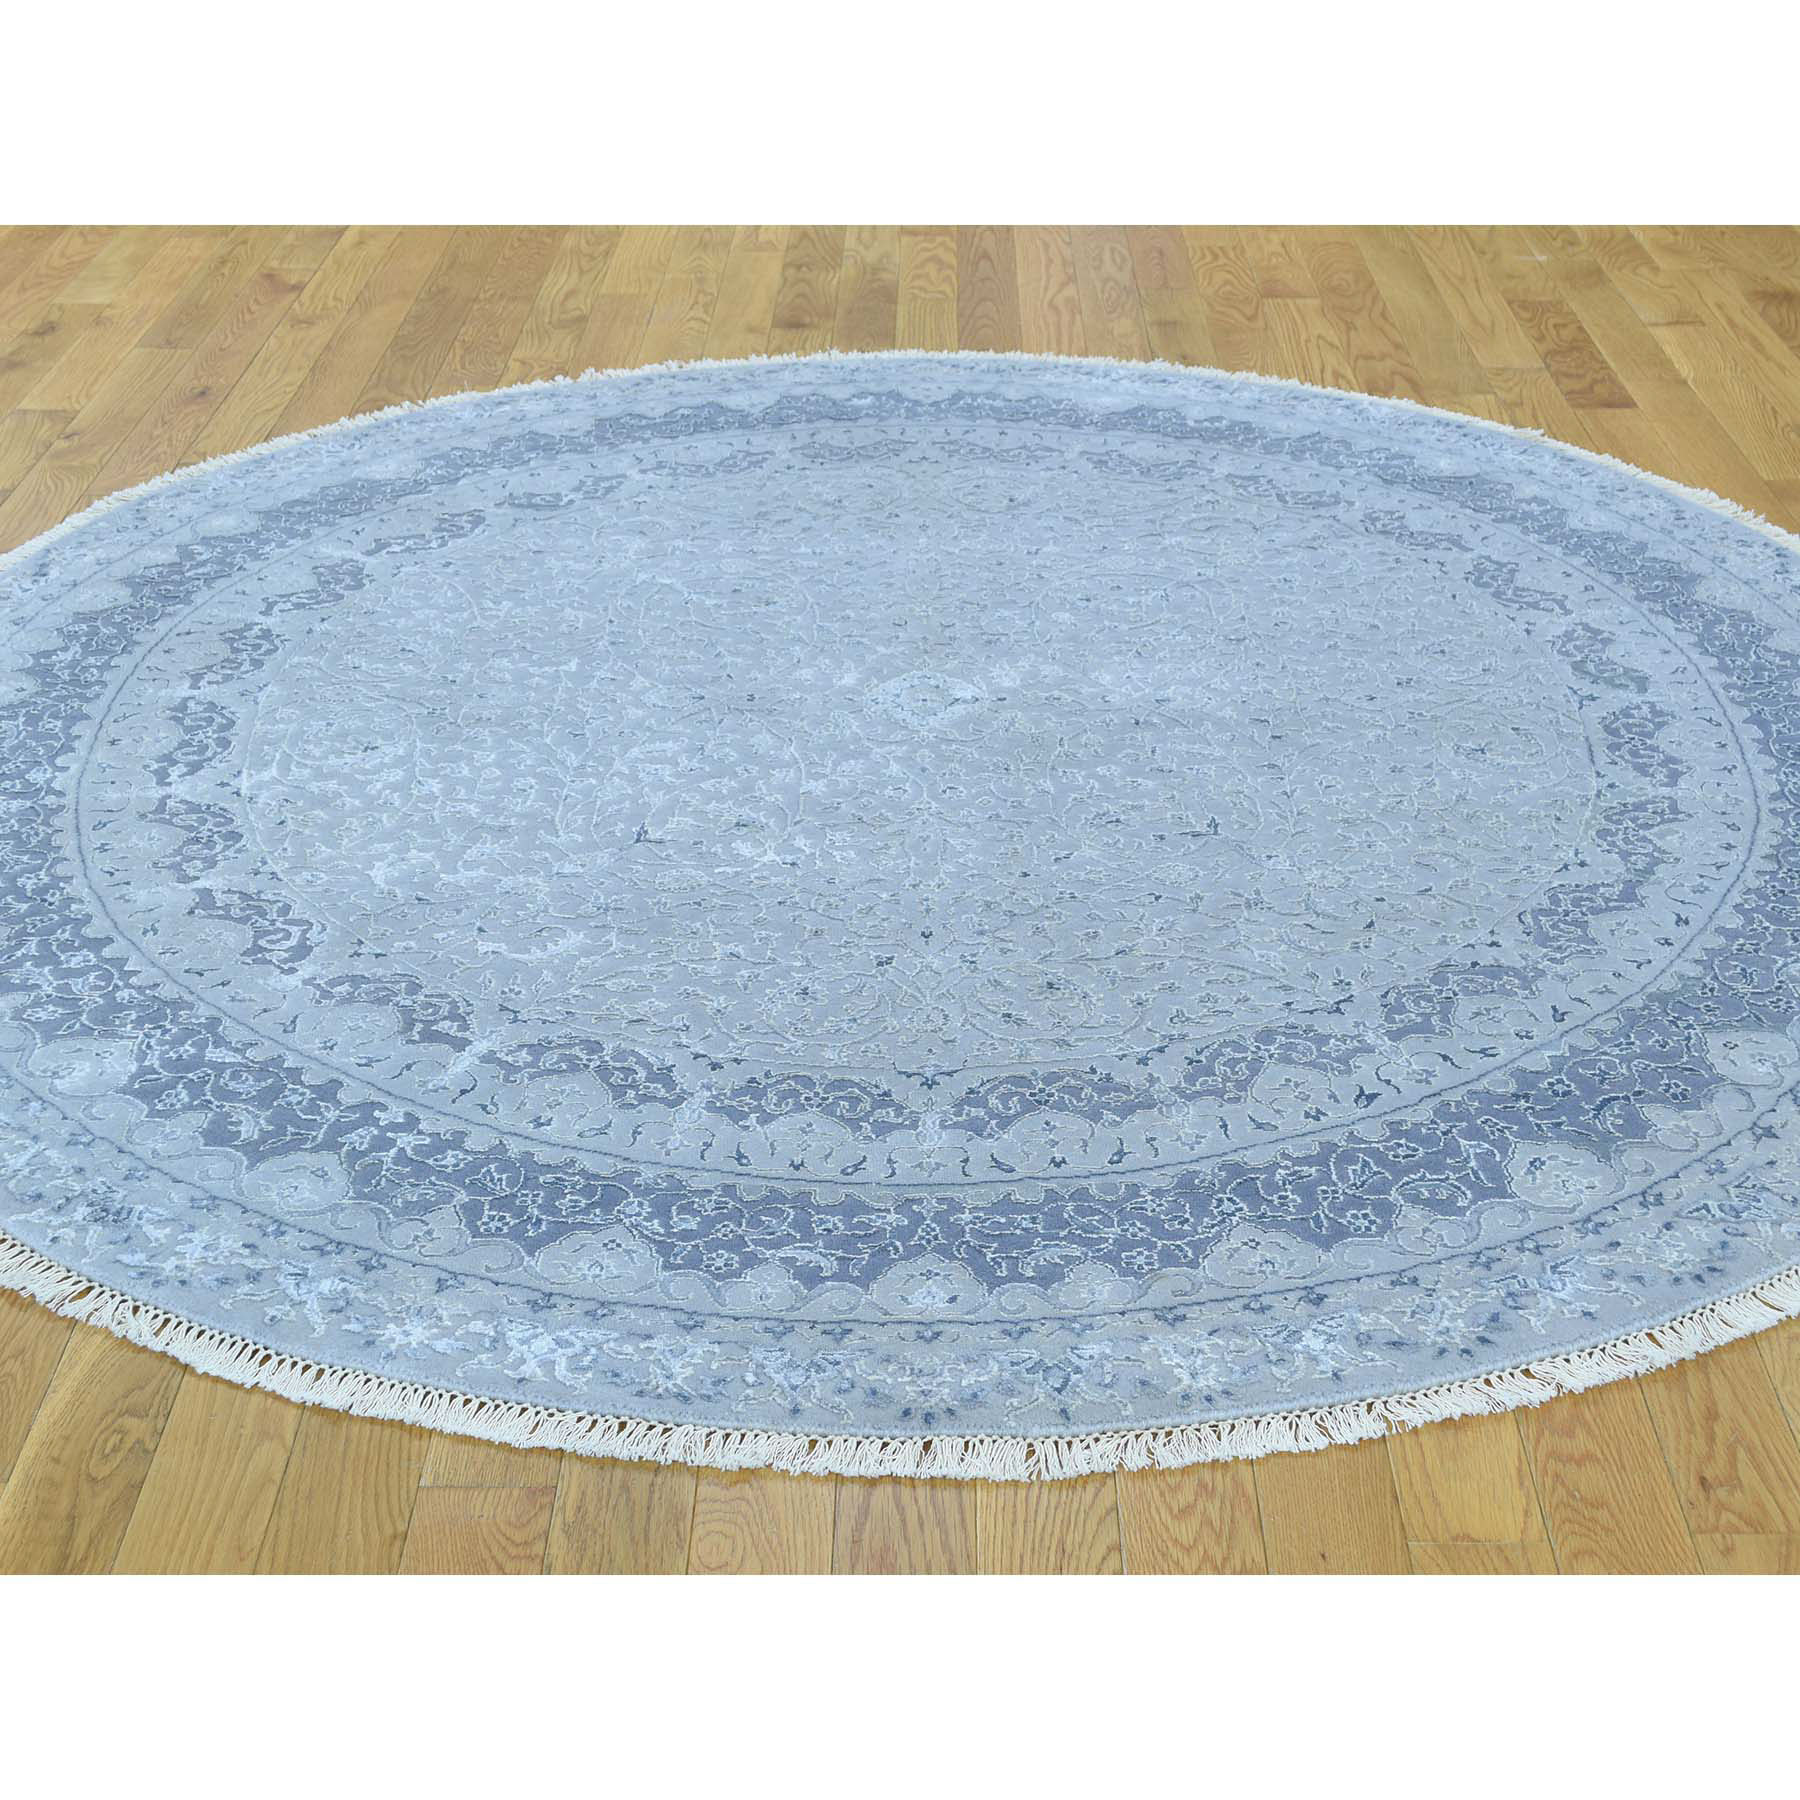 6-7 x6-7  Wool and Silk Hand-Knotted Kashan Design Round 300 Kpsi Rug 